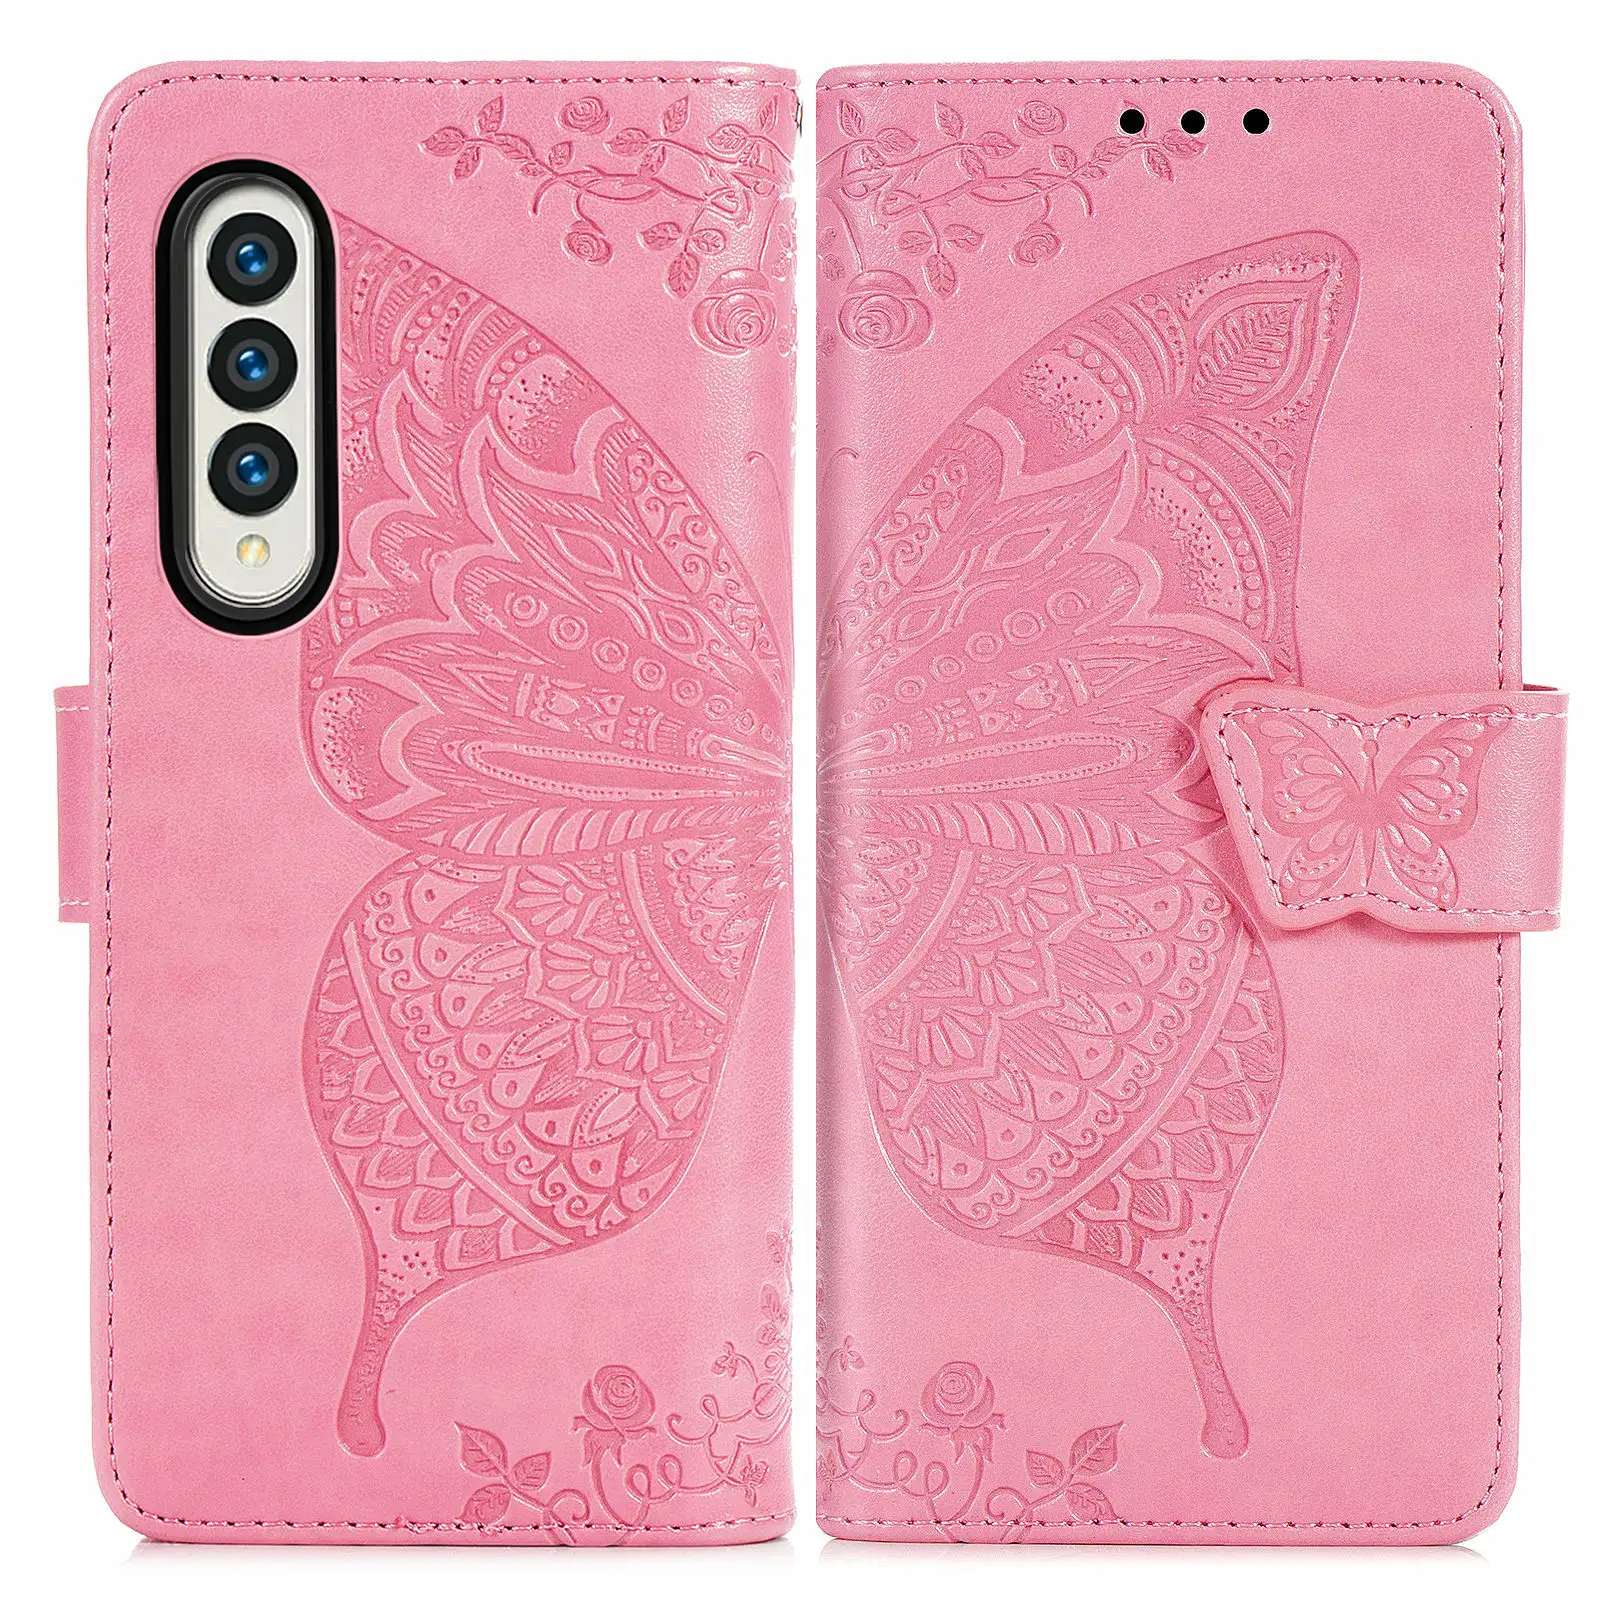 Mobile phone leather case for Samsung Z Fold 3 mobile phone cover left and right folding screen flip card sleeve Galaxy A51